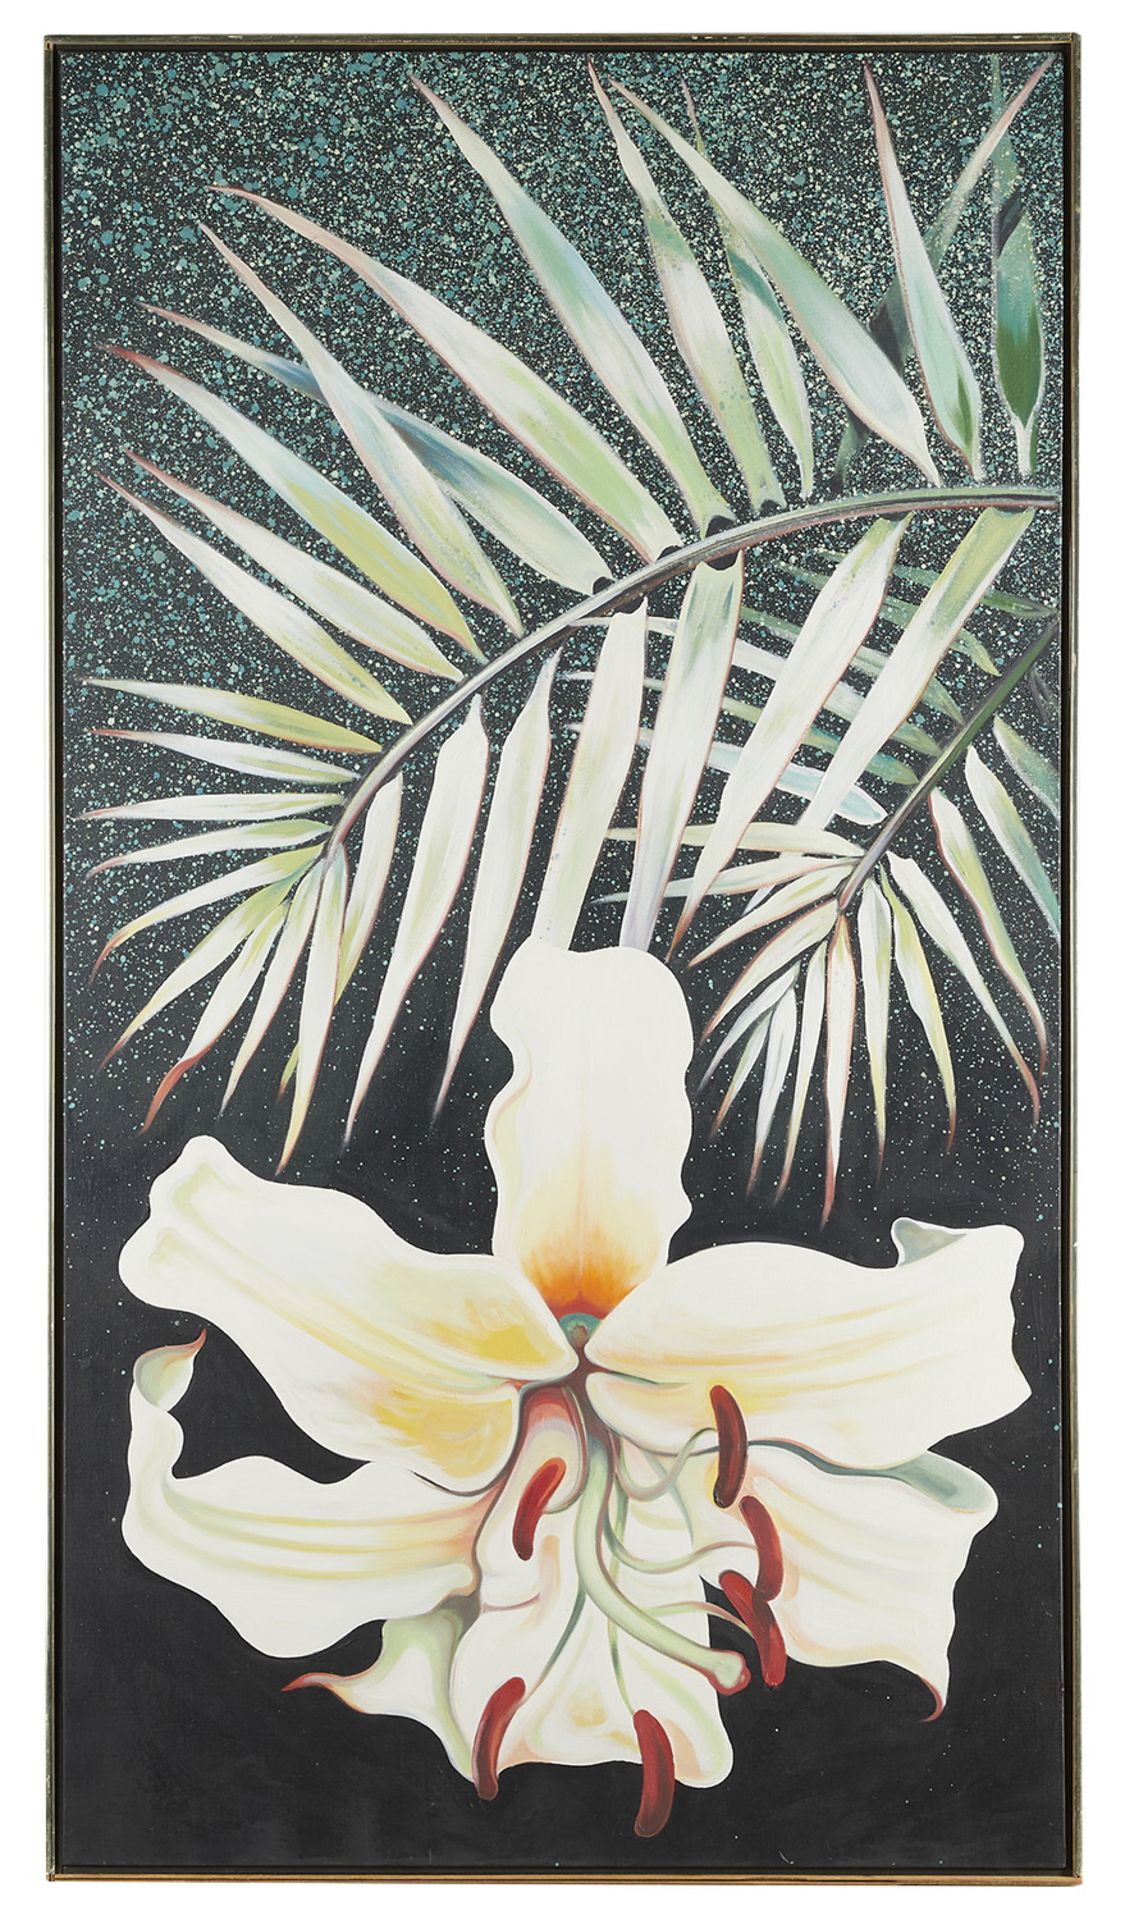 Lowell Nesbitt "Jungle Lily" Oil on Canvas 1987 - Image 3 of 6